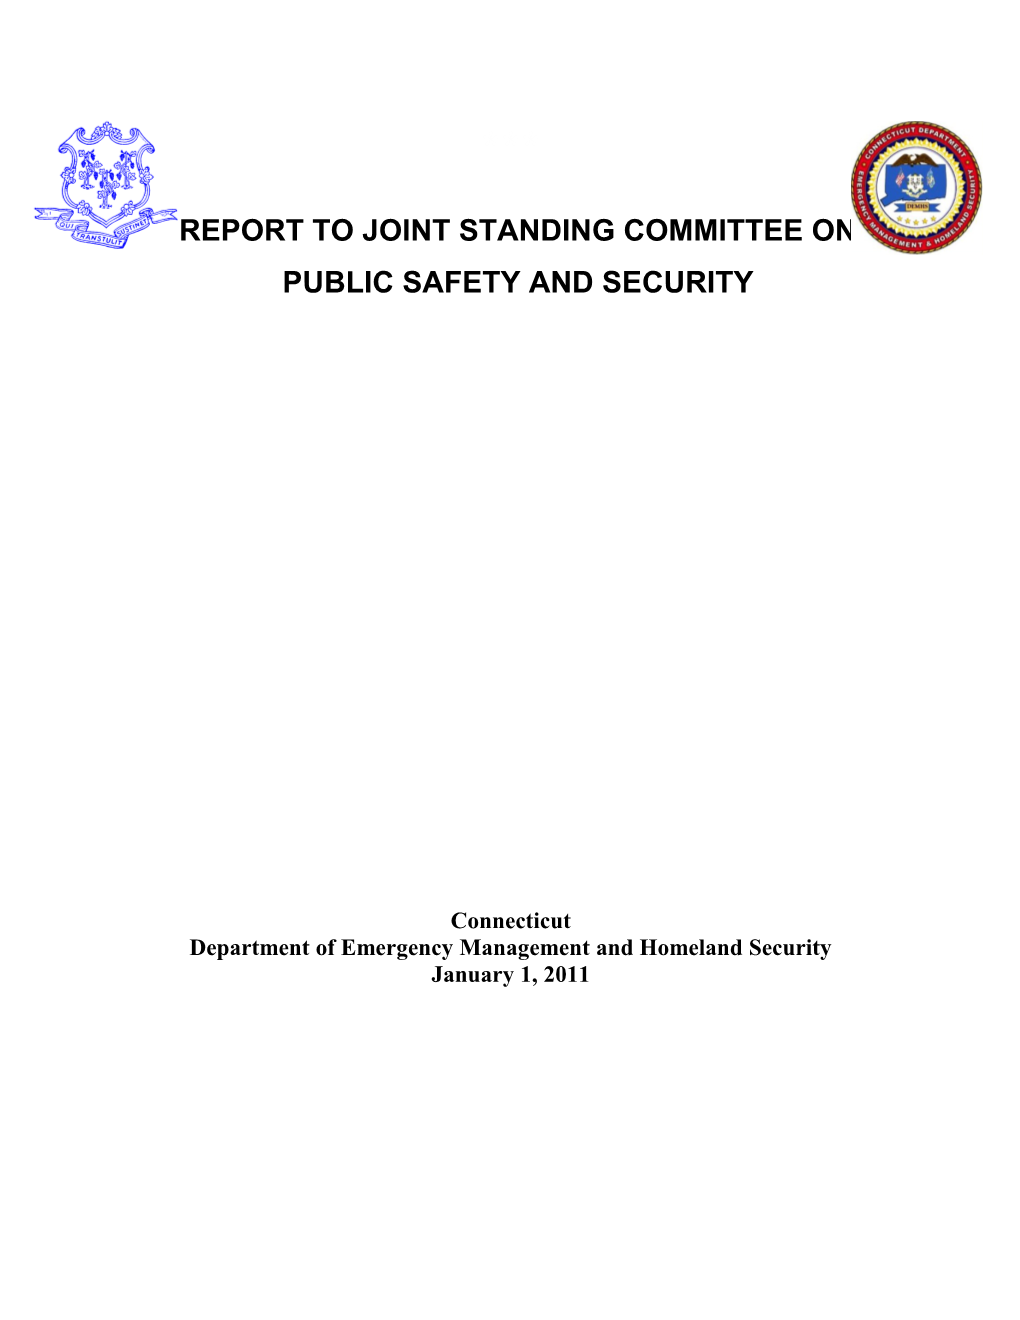 Report to Joint Standing Committee on Public Safety and Security